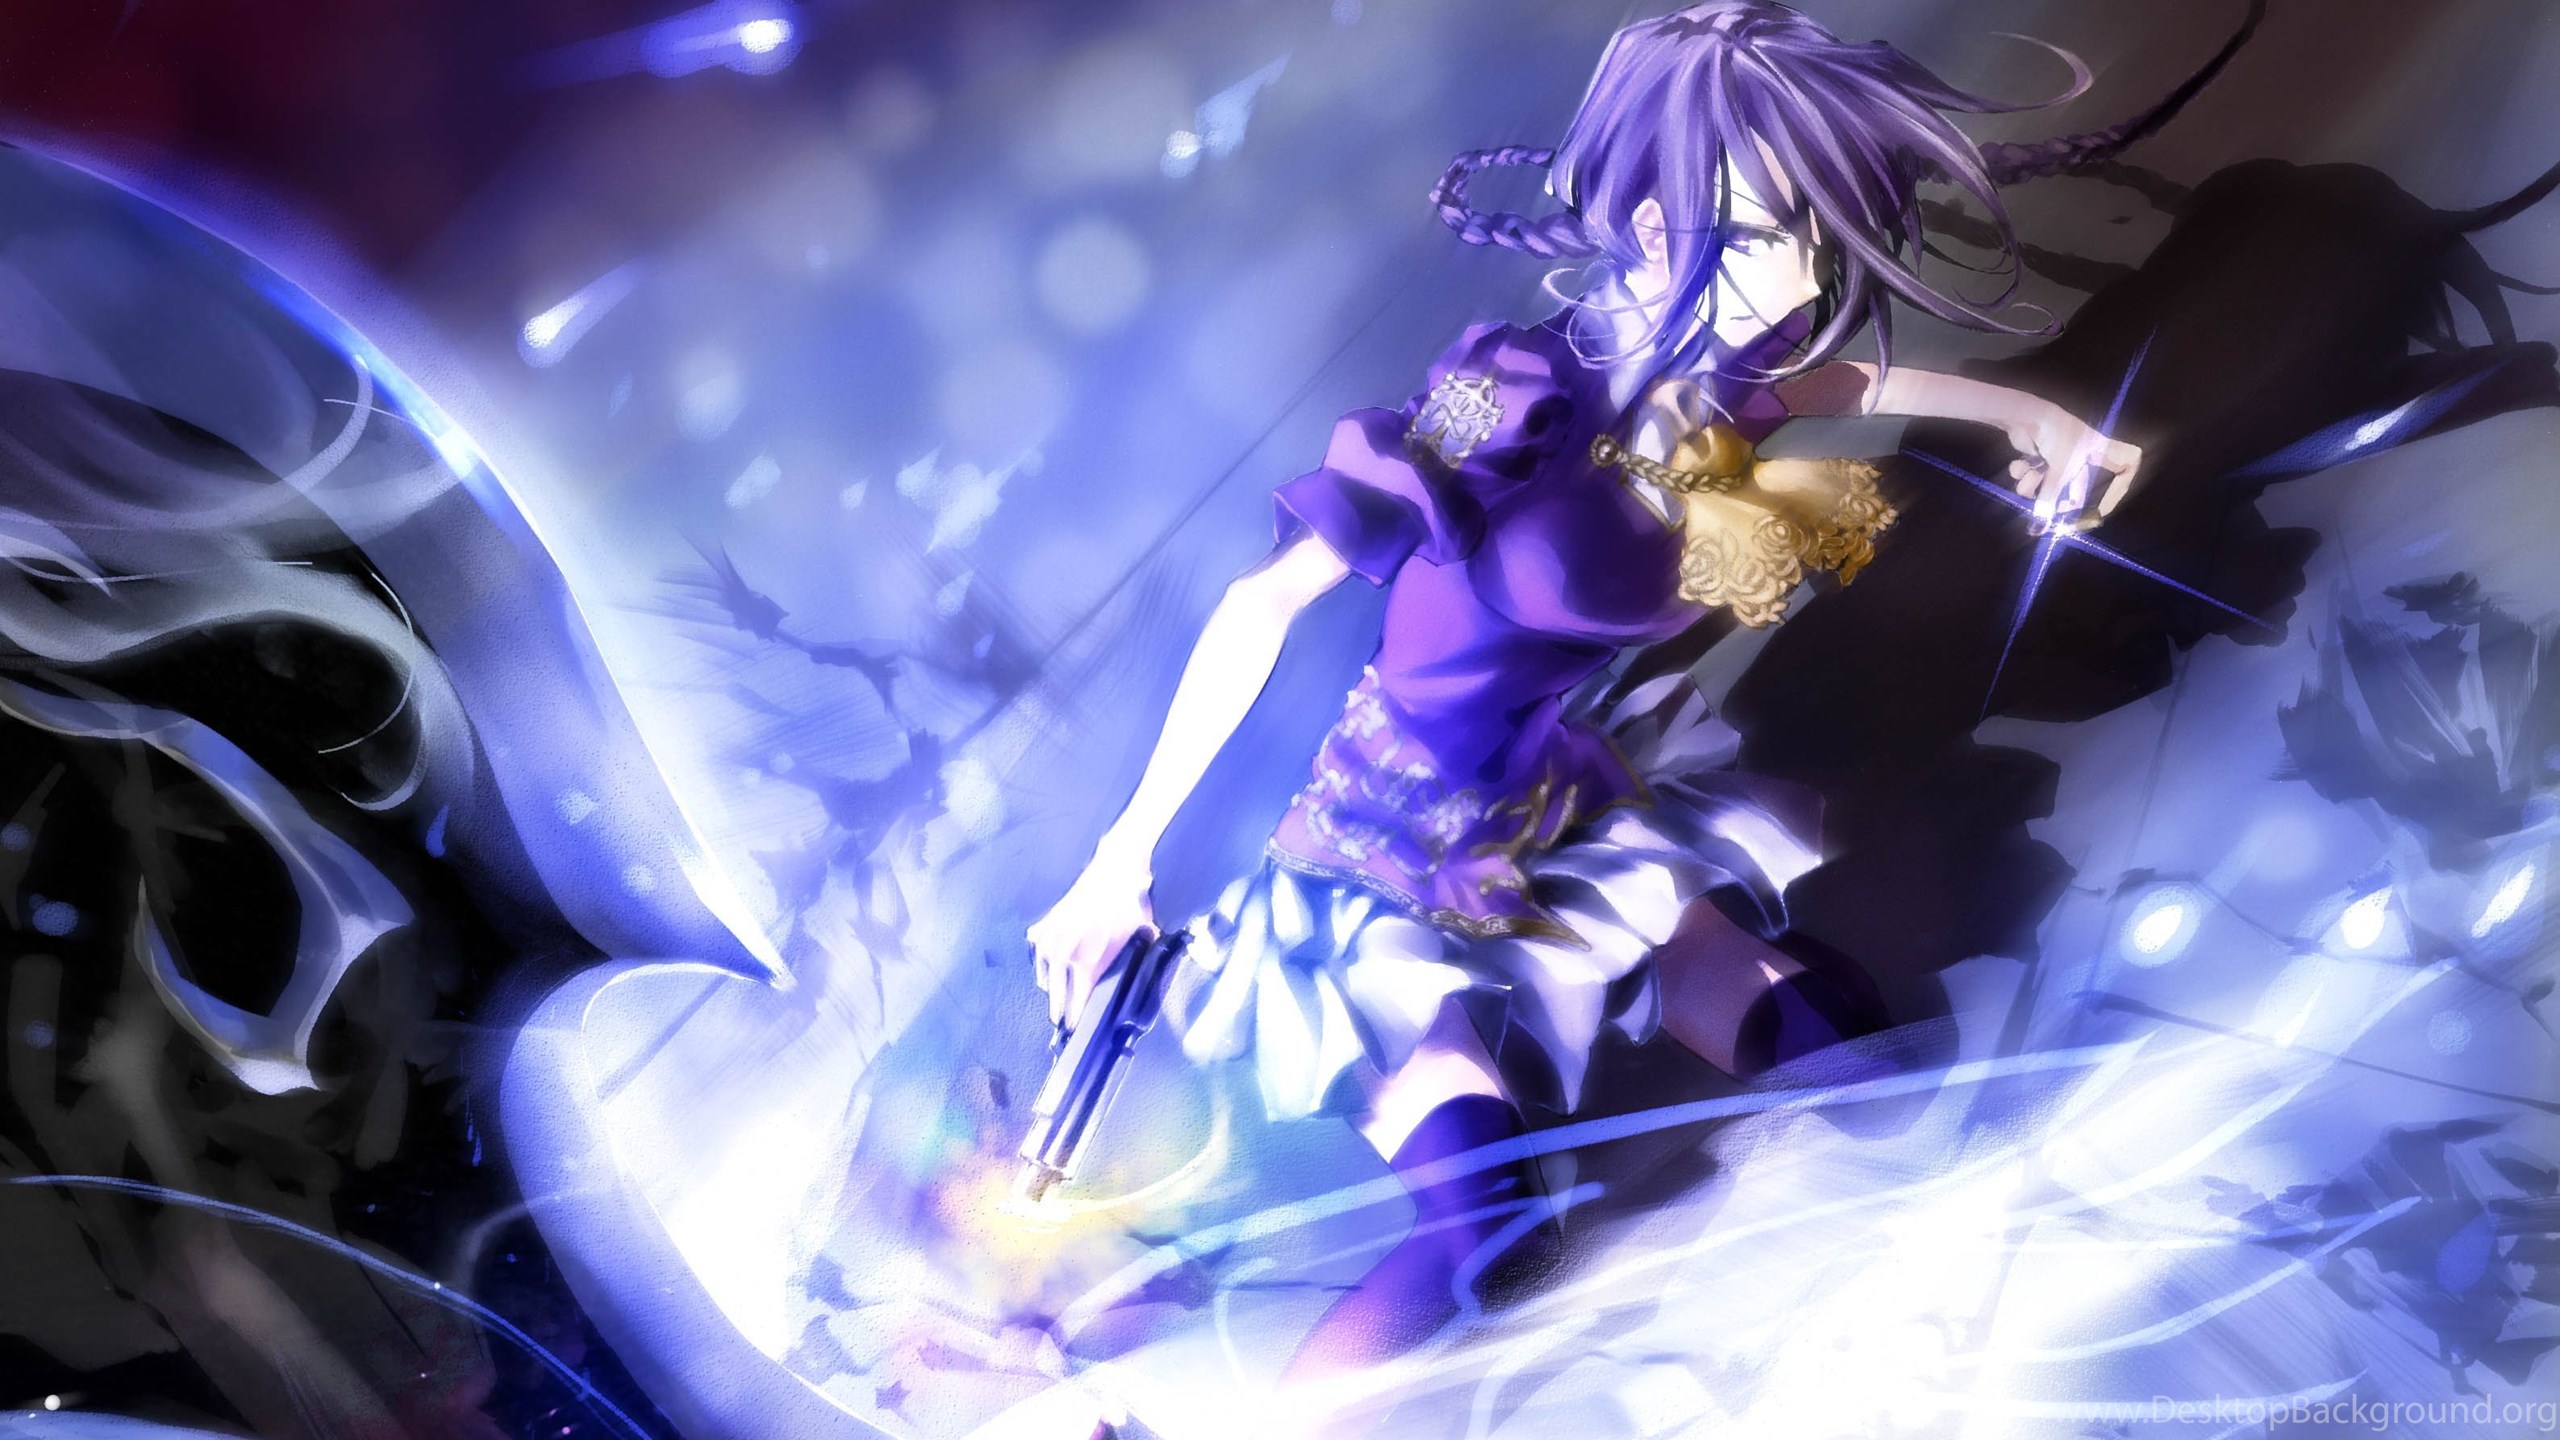 506081 1680x1050 HDQ Images melty blood JPG 306 kB  Rare Gallery HD  Wallpapers